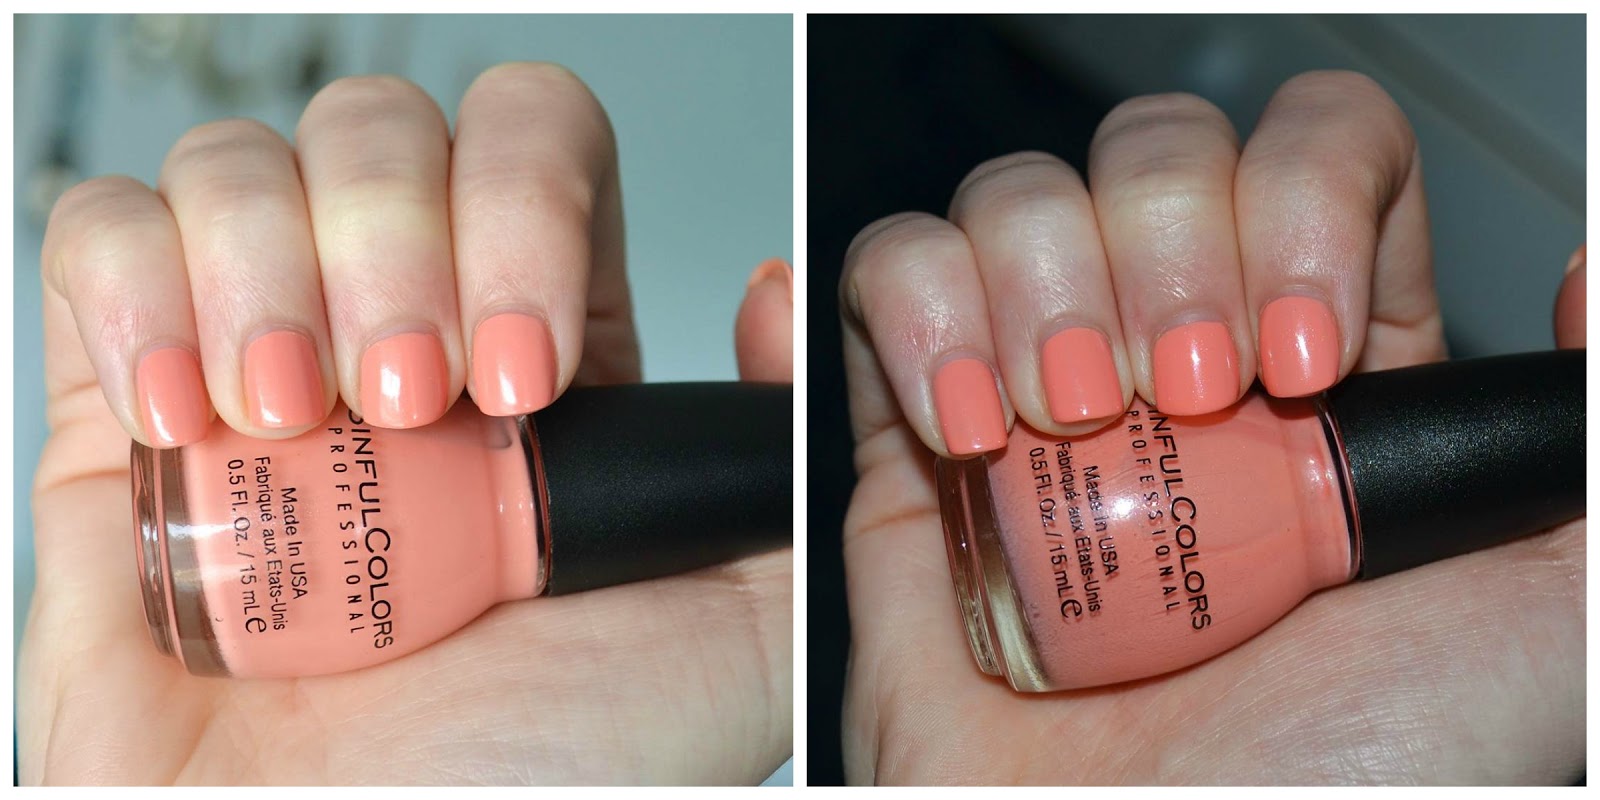 9. Sinful Colors Professional Nail Polish in "Cream Pink" - wide 5